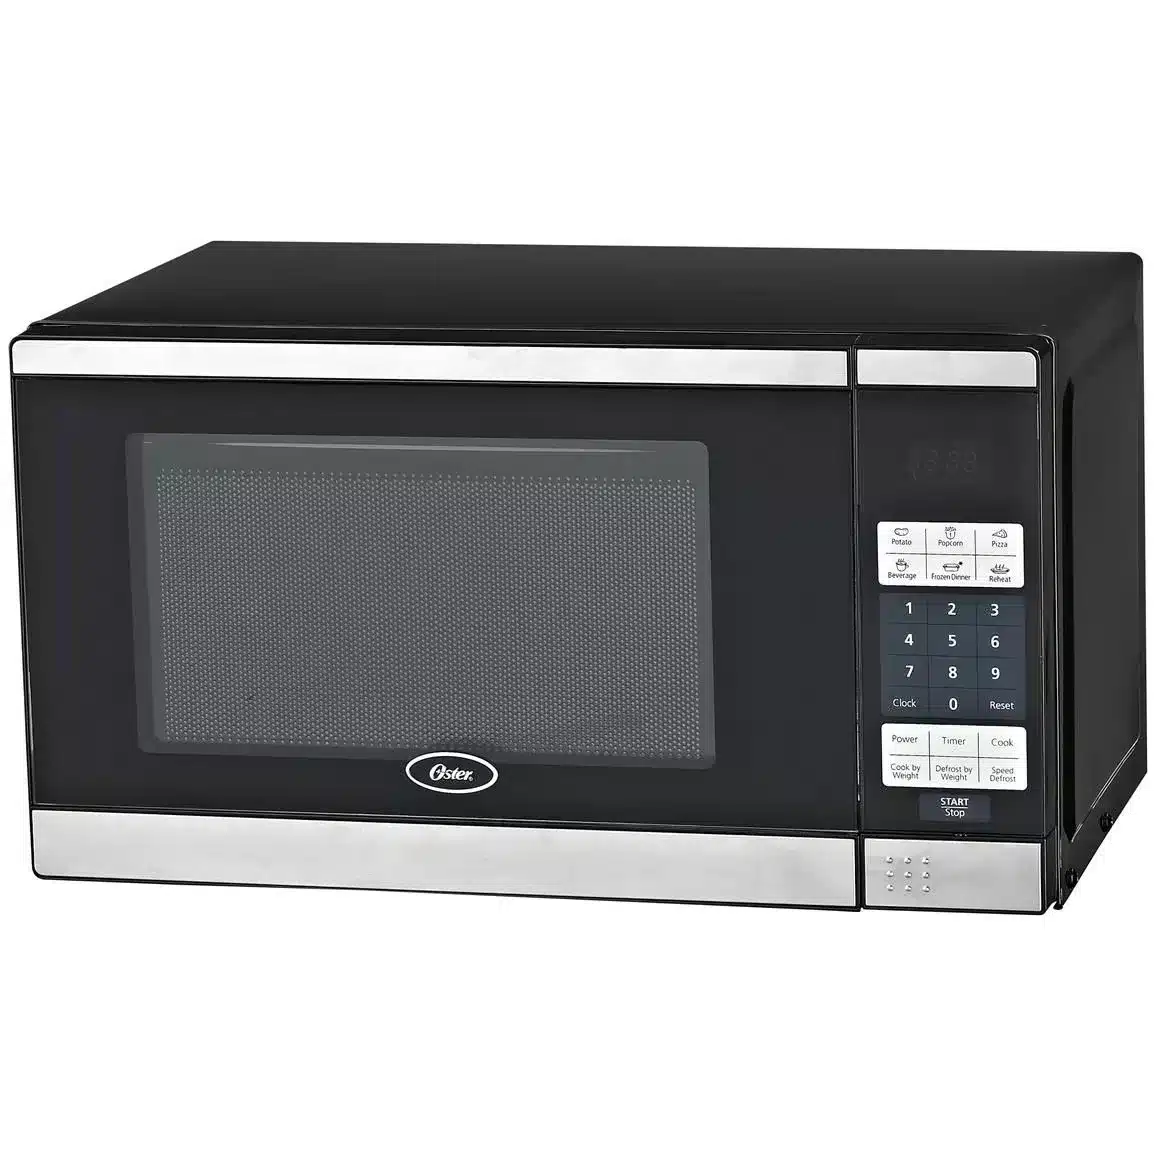 oster-microwaves-a-dig-into-the-brand